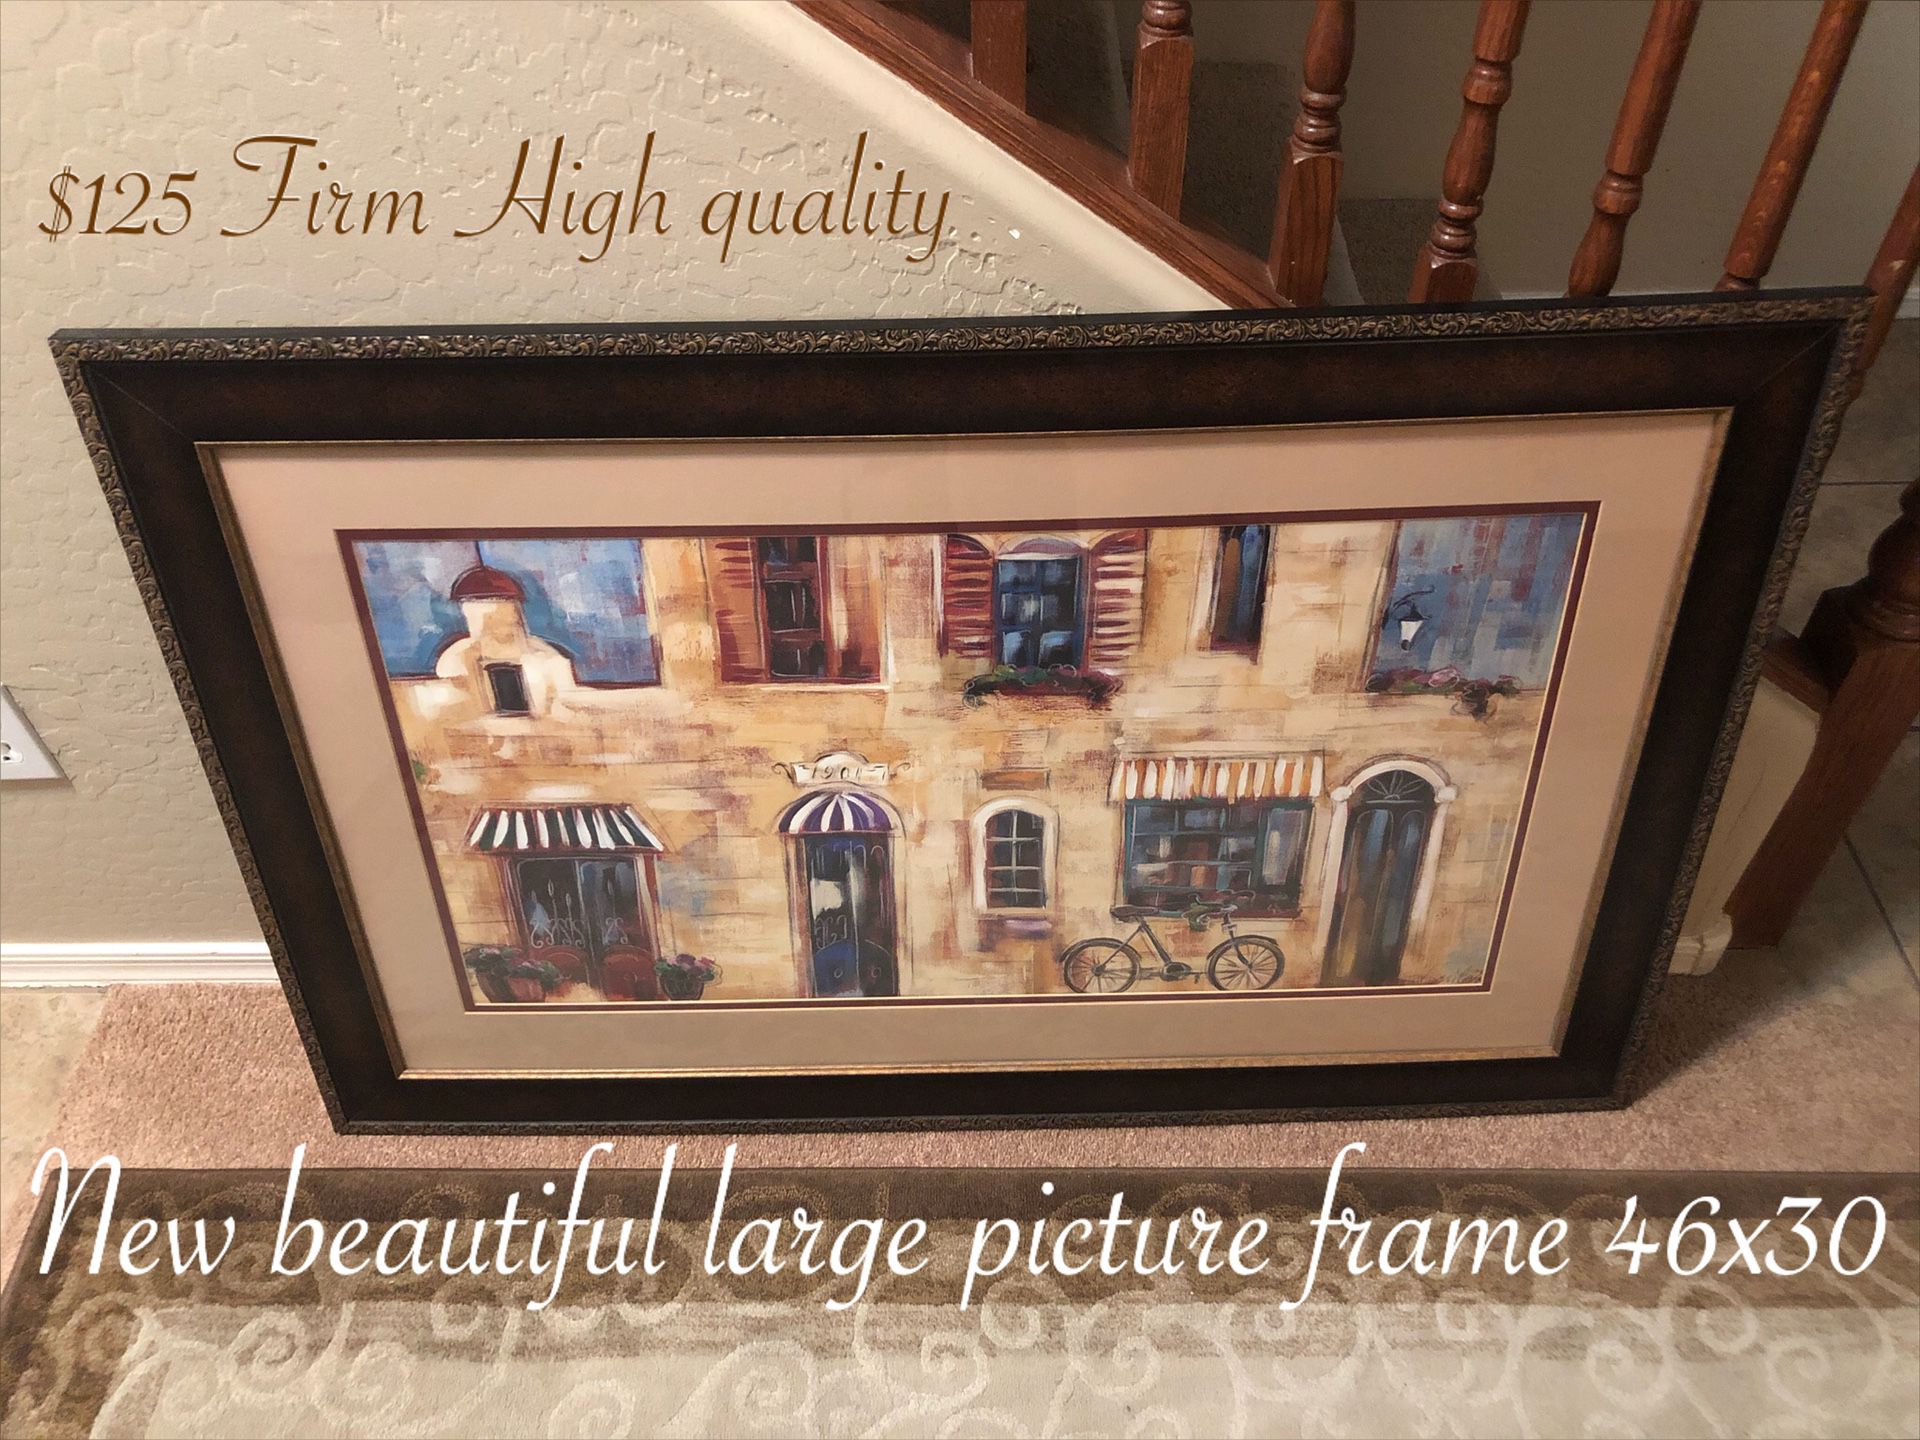 New beautiful large picture frame 46 x 30 $125 firm